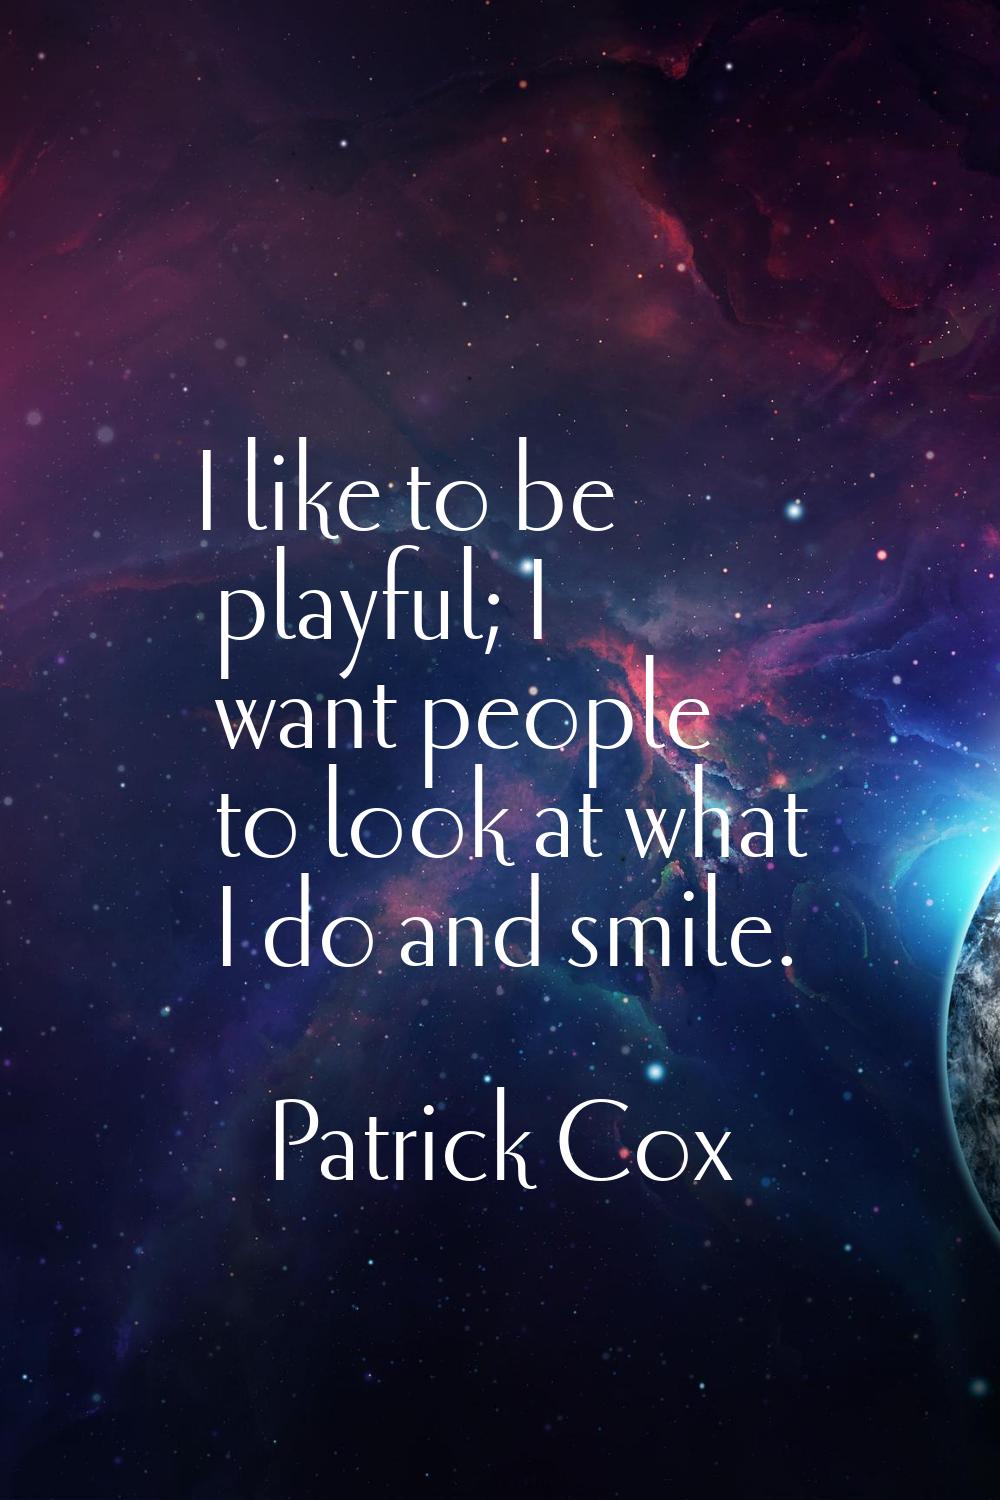 I like to be playful; I want people to look at what I do and smile.